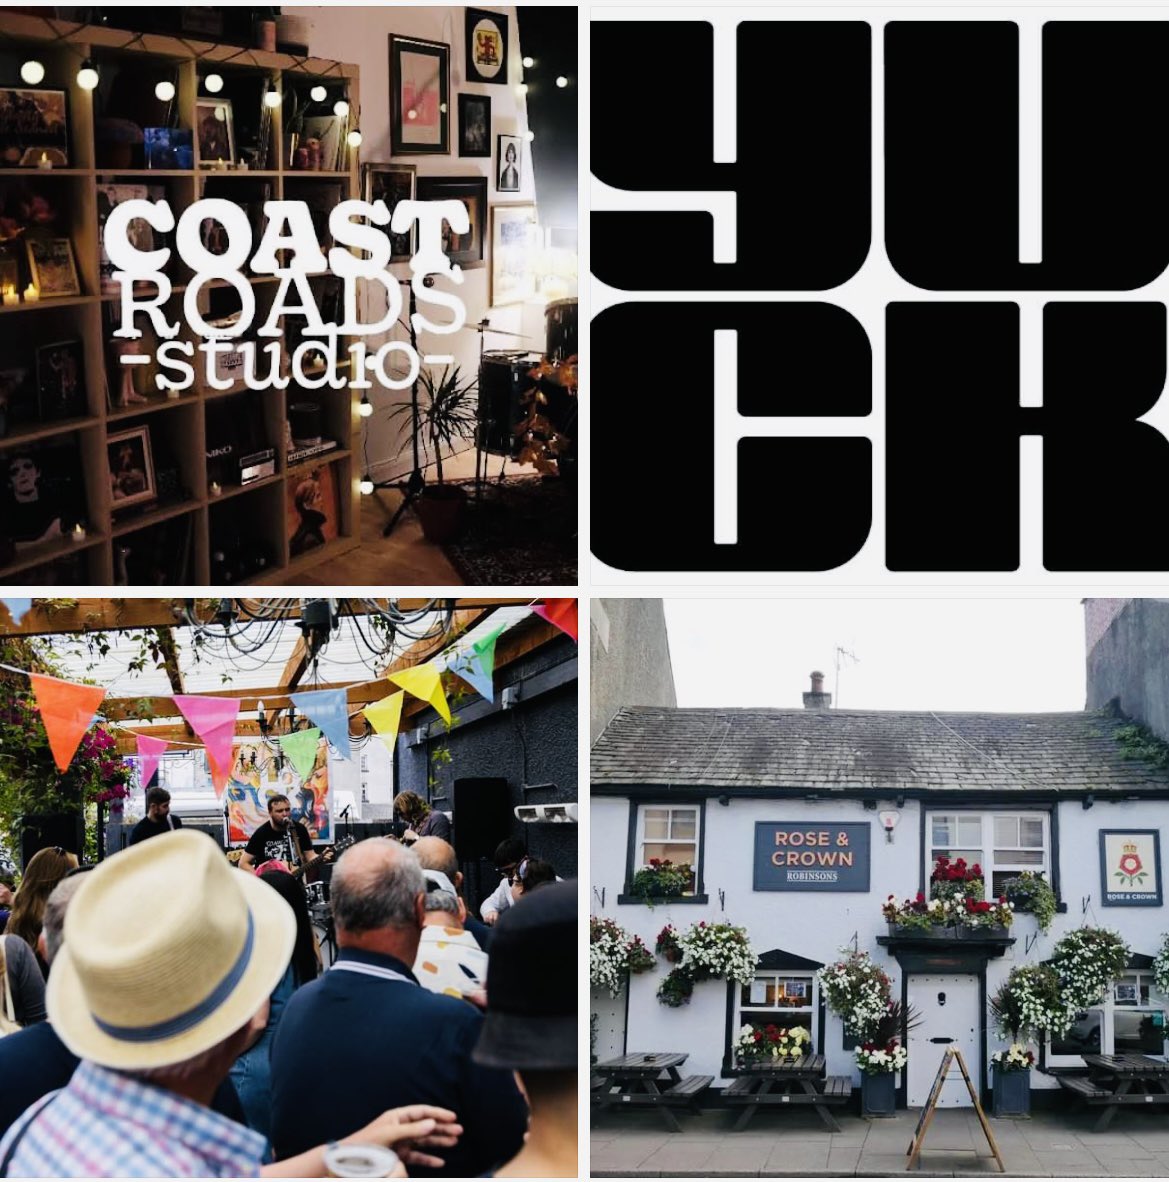 With the announcement of their very awesome looking festival at Barrow Park this July, tonight seems like the perfect time to shine the spotlight on the wonderful @coastroadstudio stage which will take place on Sat 15th in the lovely Rose and Crown beer garden. 😎